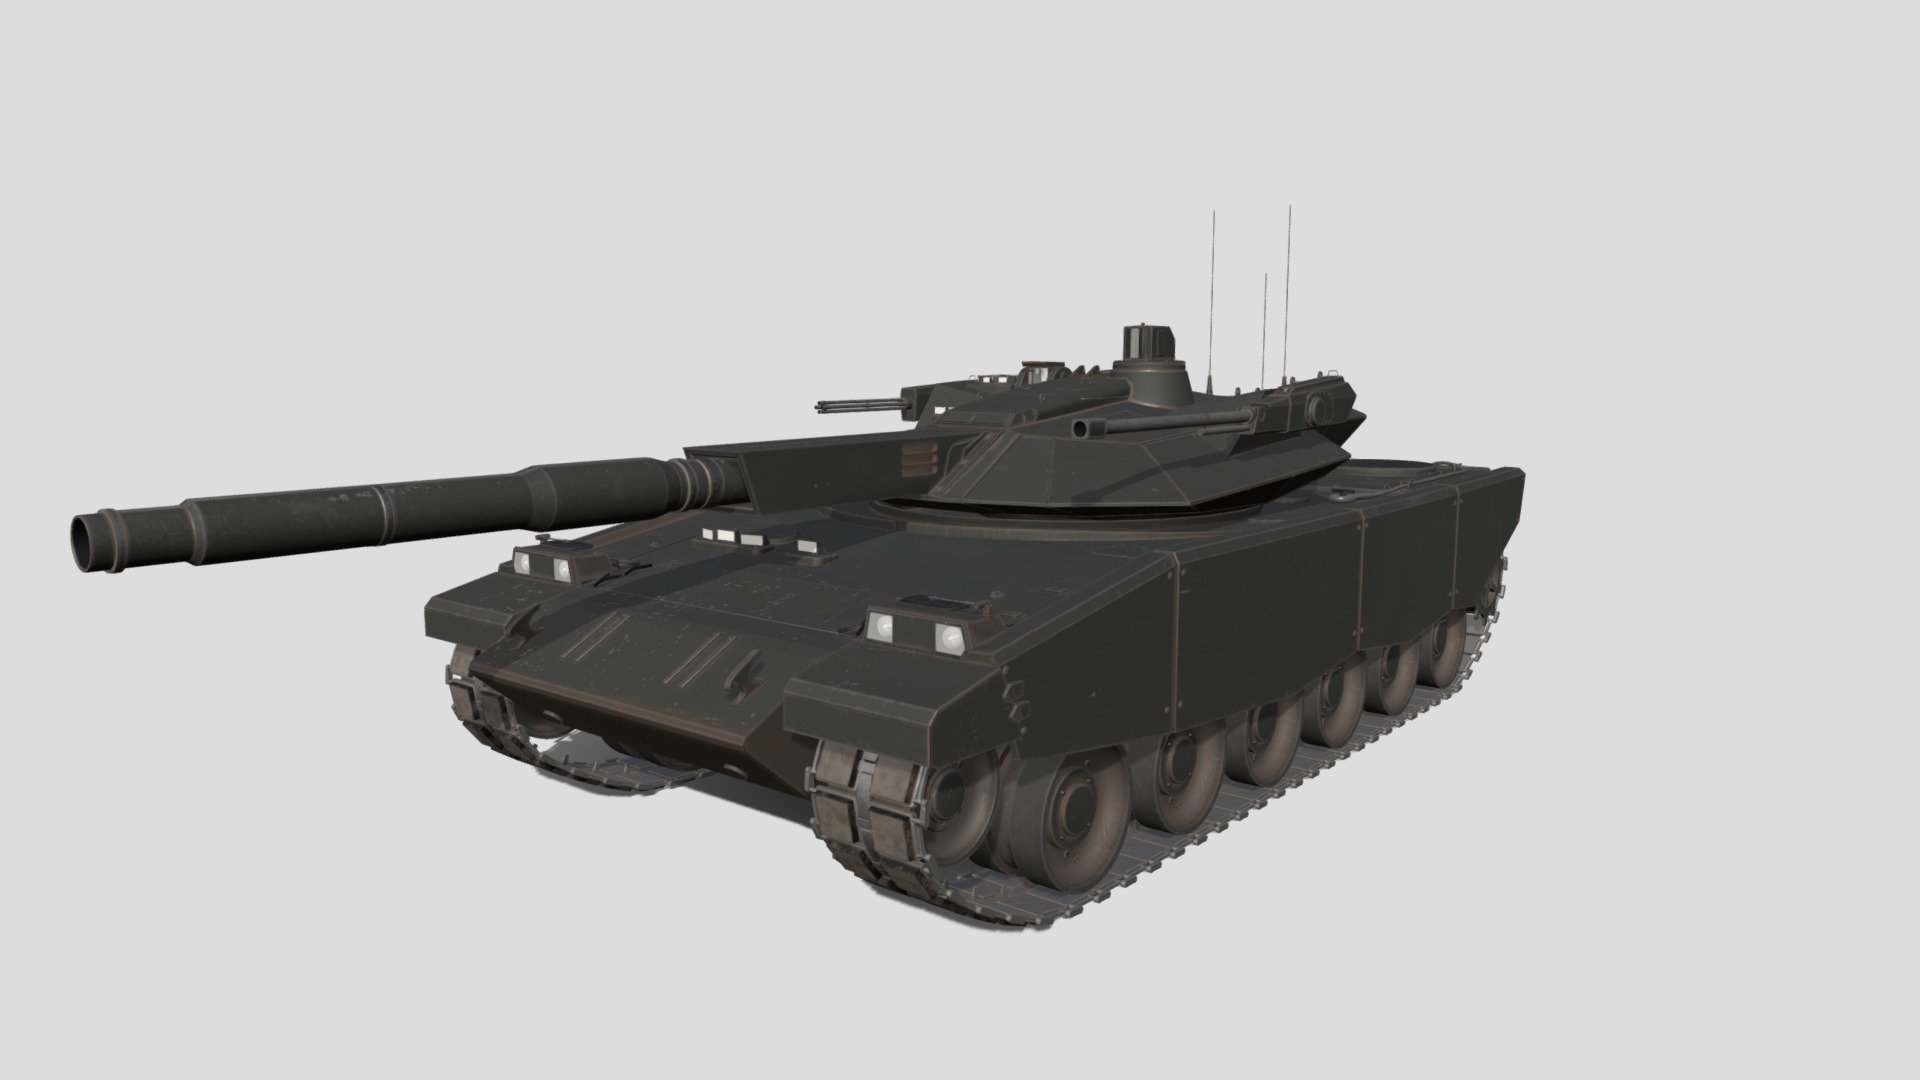 T-118 Jaguar

The Jaguar is an experimental main battle tank designed to be used in a vast setting of combat situations and environments.

The asset is highly detailed, while still maintaining a relatively low-poly count.
The asset contains separated wheels and tracks ready for rigging and animation.

Contains five texture sets. One 4096x4096, two 2048x2048, one 1024x1024, one 512x512

PBR: BaseColor, Metallic, Normal, Roughness

Tris Count: 224,232 Poly Count: 114,162

If you have any questions, feel free to contact me 3d model